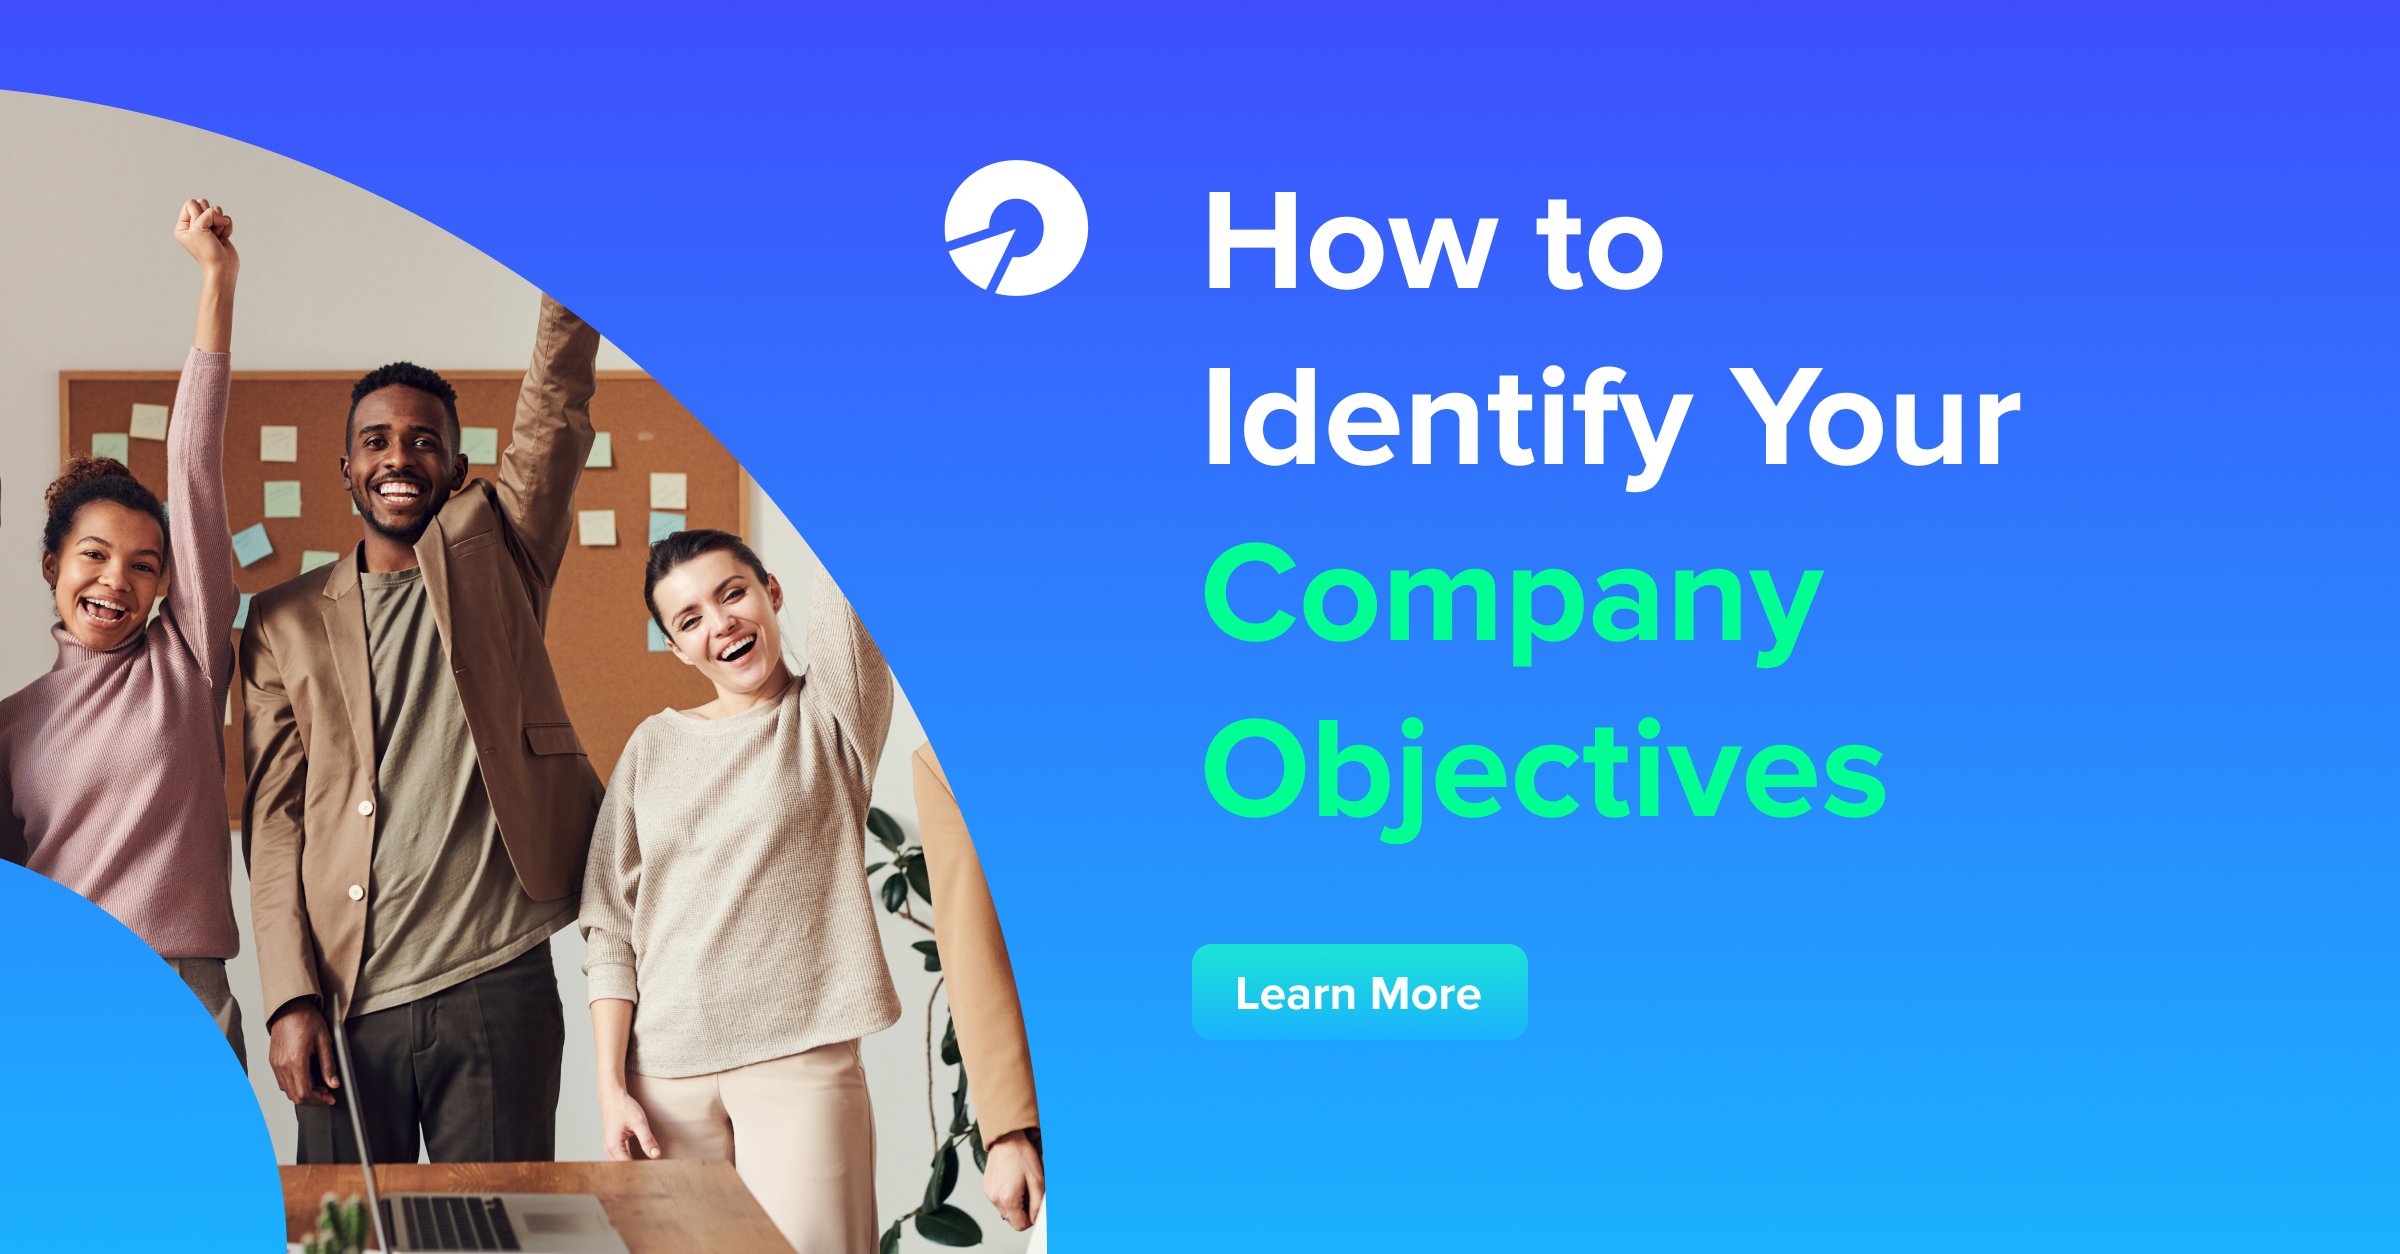 How to Identify Your Company Objectives